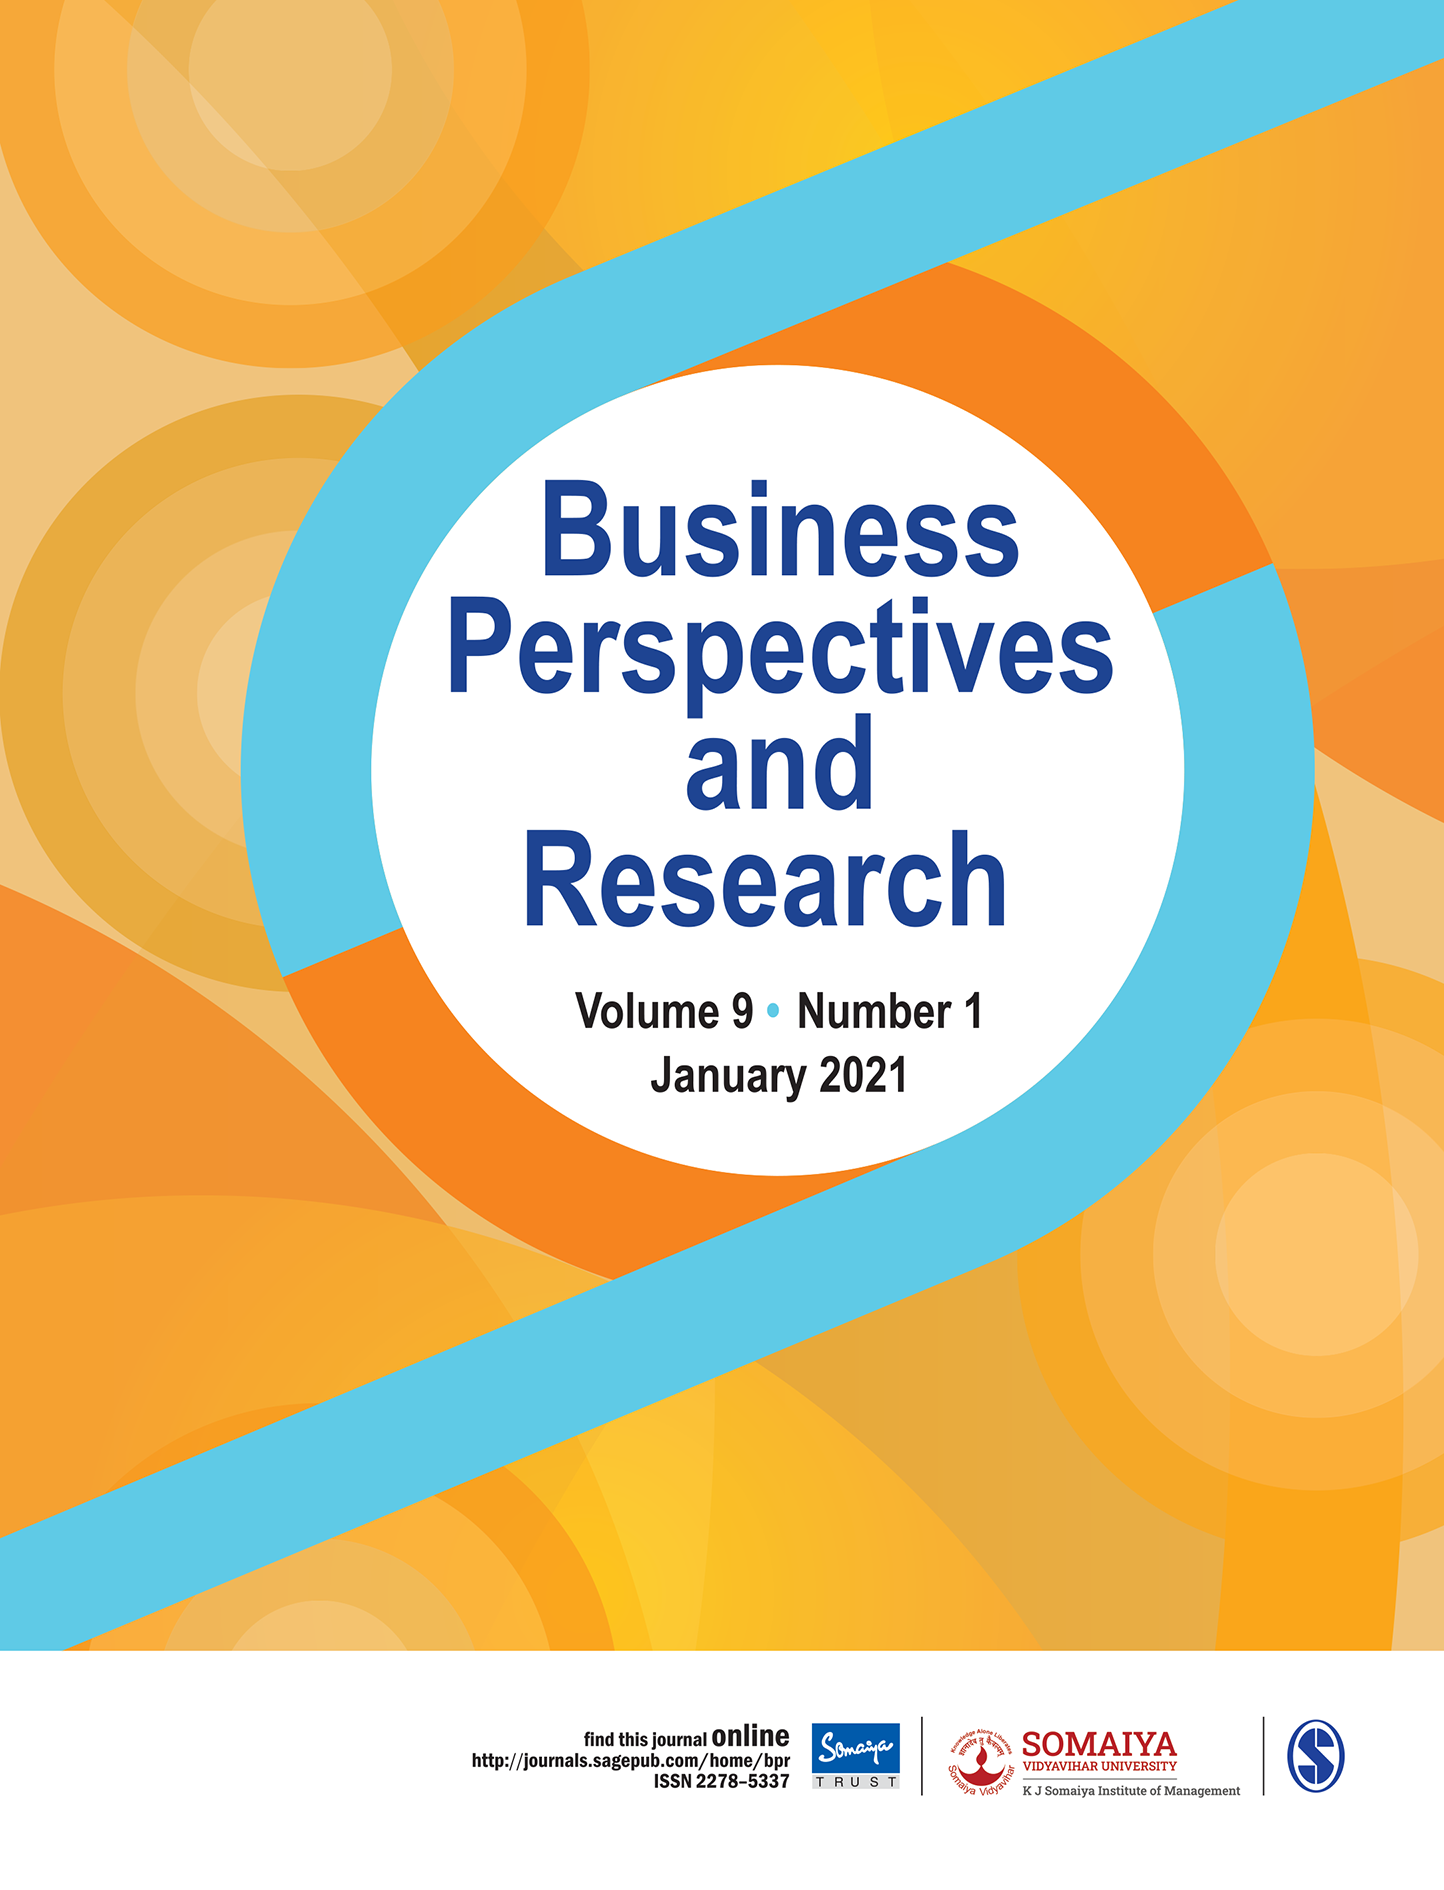 Business Perspectives and Research